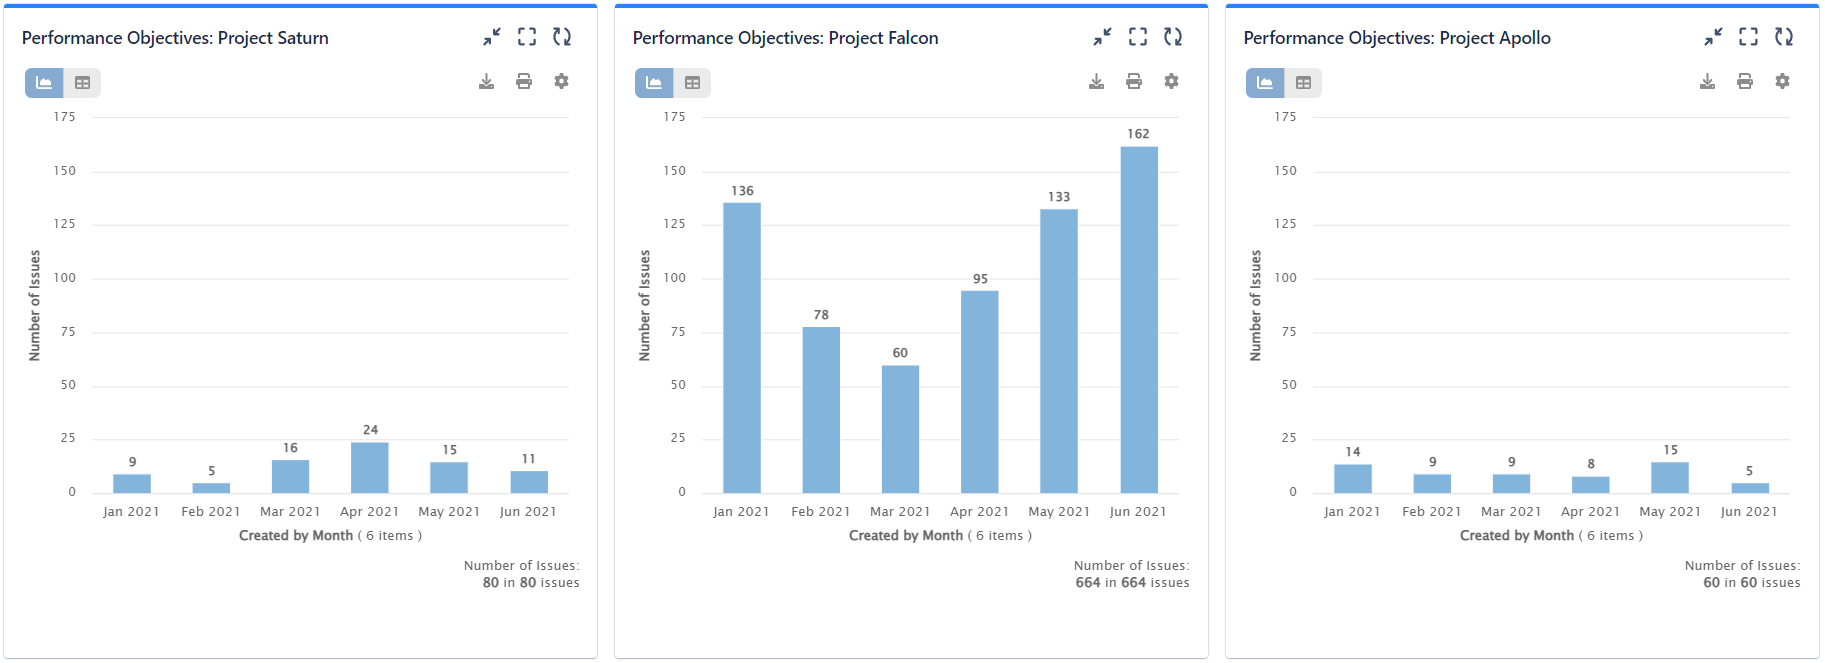 Customize y-axis in Performance Objectives app